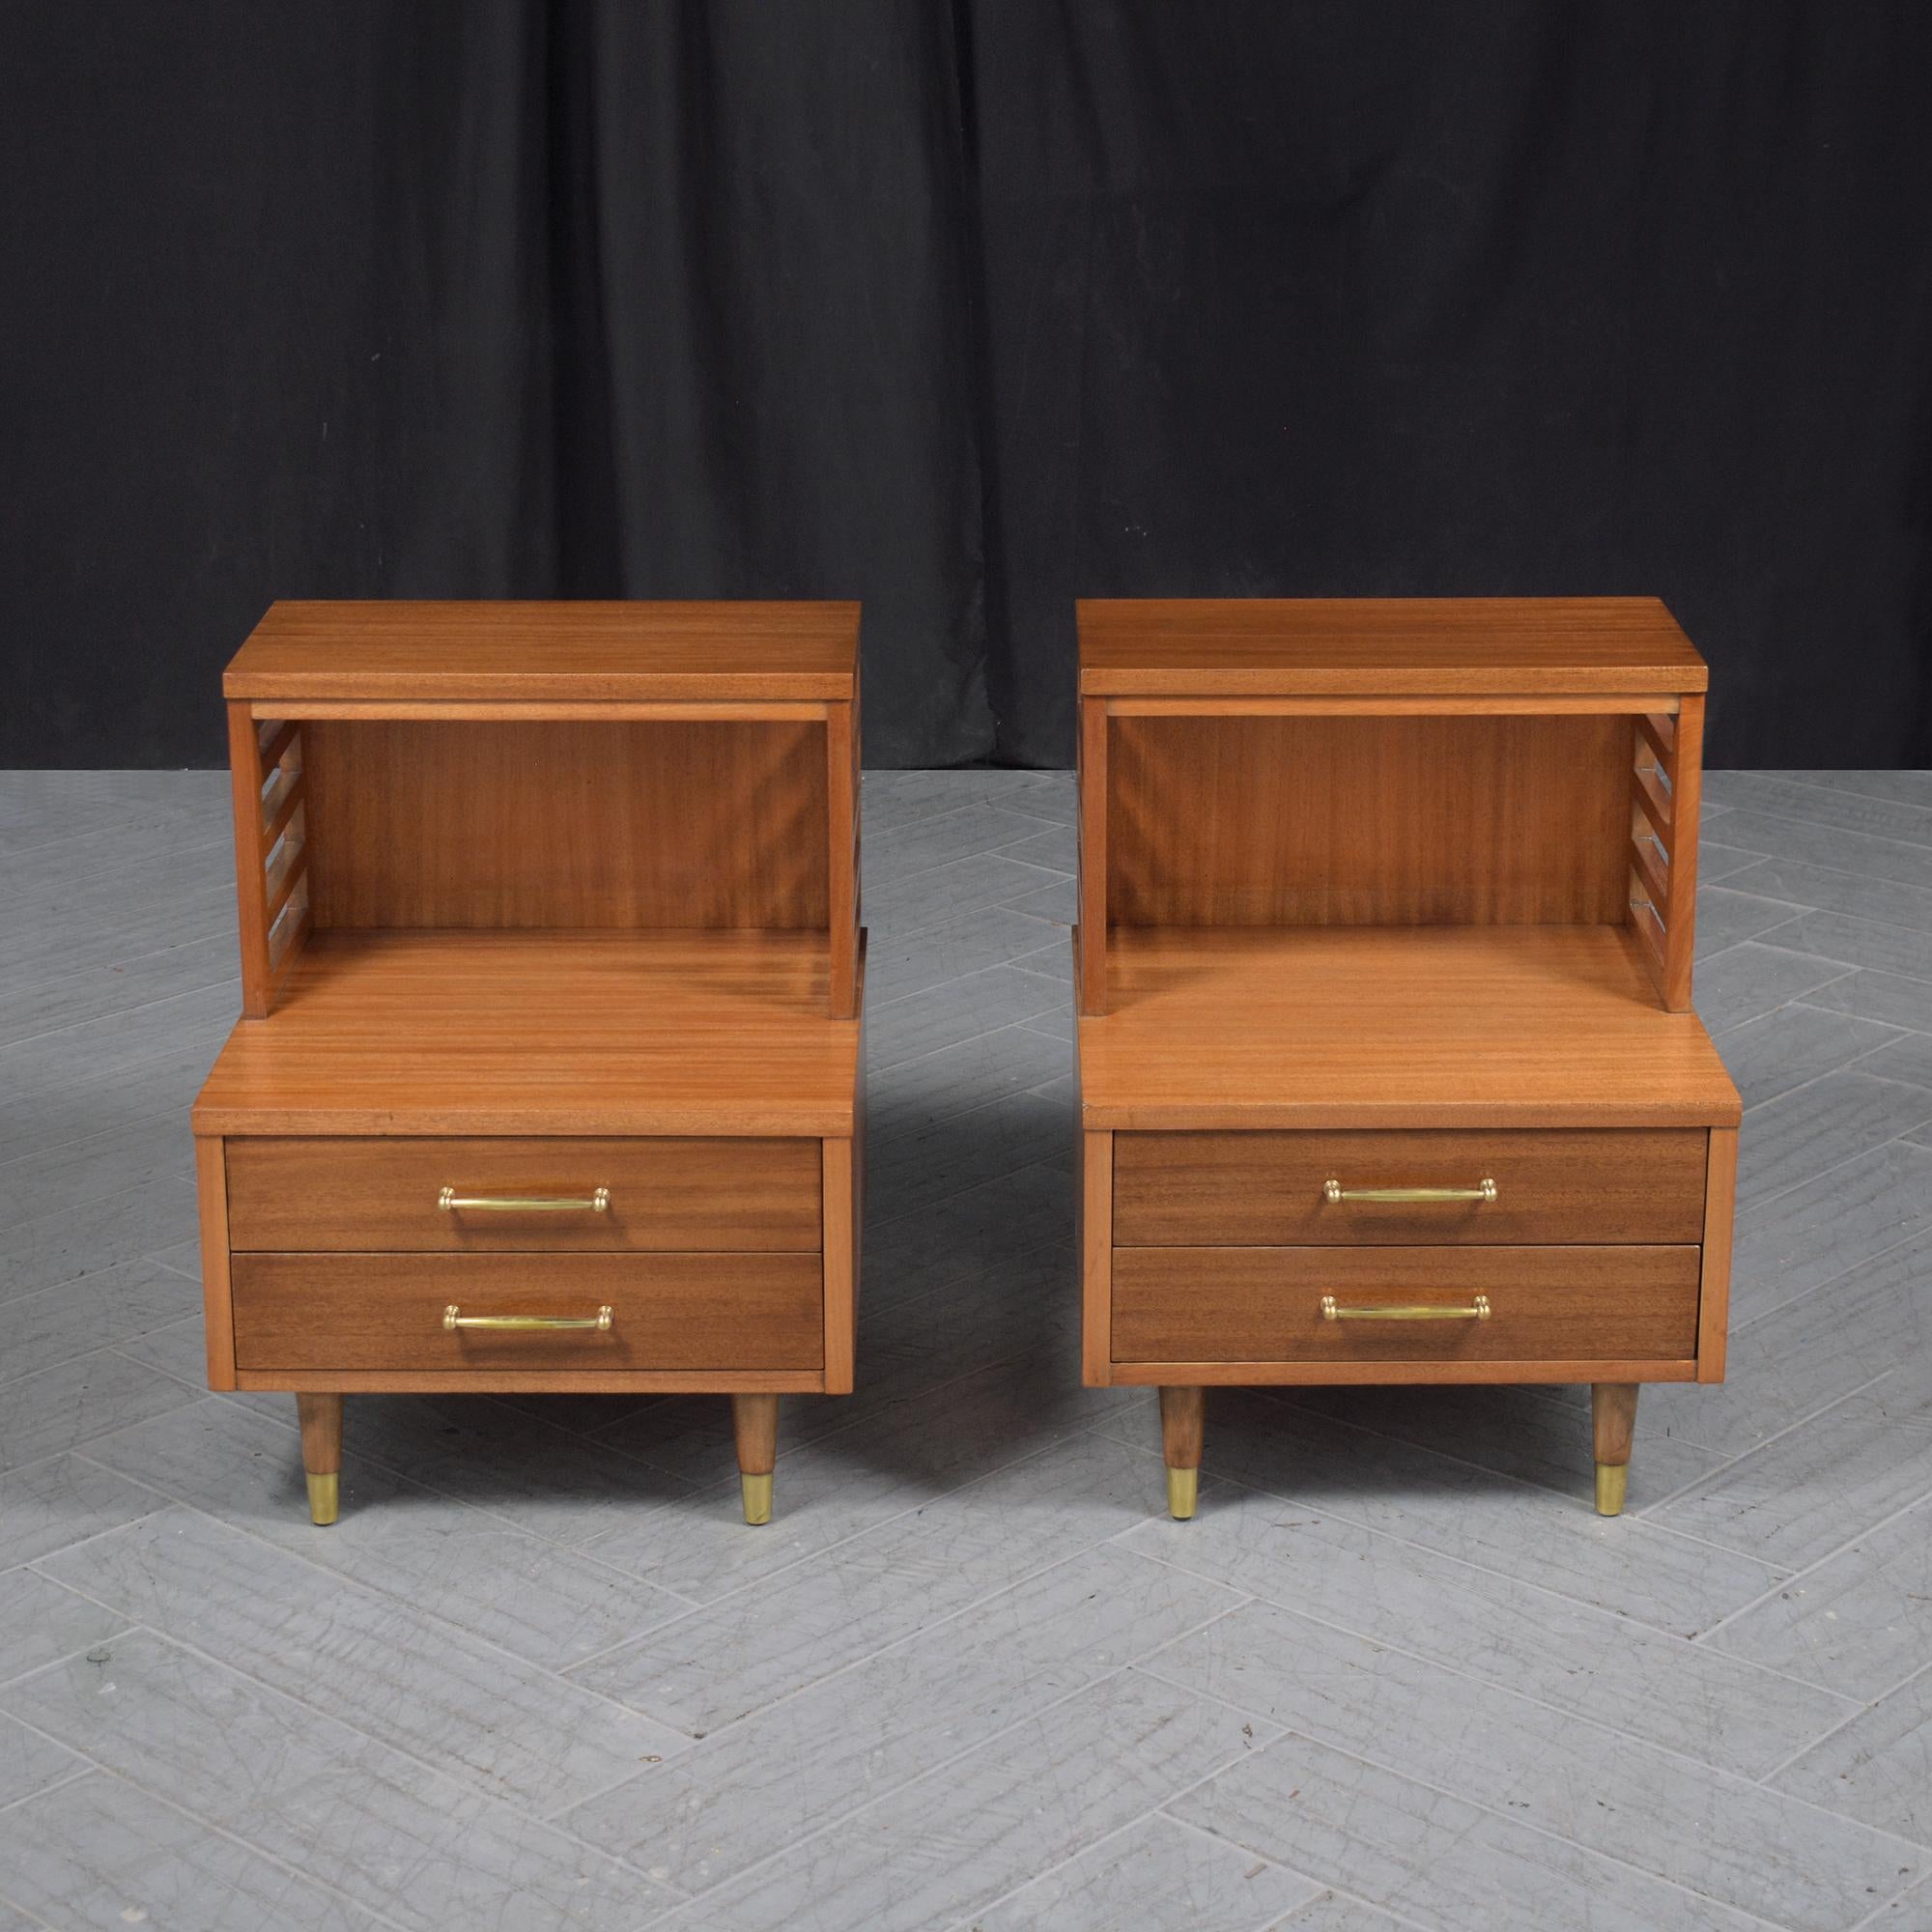 Immerse yourself in the unparalleled beauty and craftsmanship of our Mid-Century Modern nightstands, expertly handcrafted from exquisite walnut wood. Our skilled craftsmen have restored these pieces to their original condition, showcasing a sleek